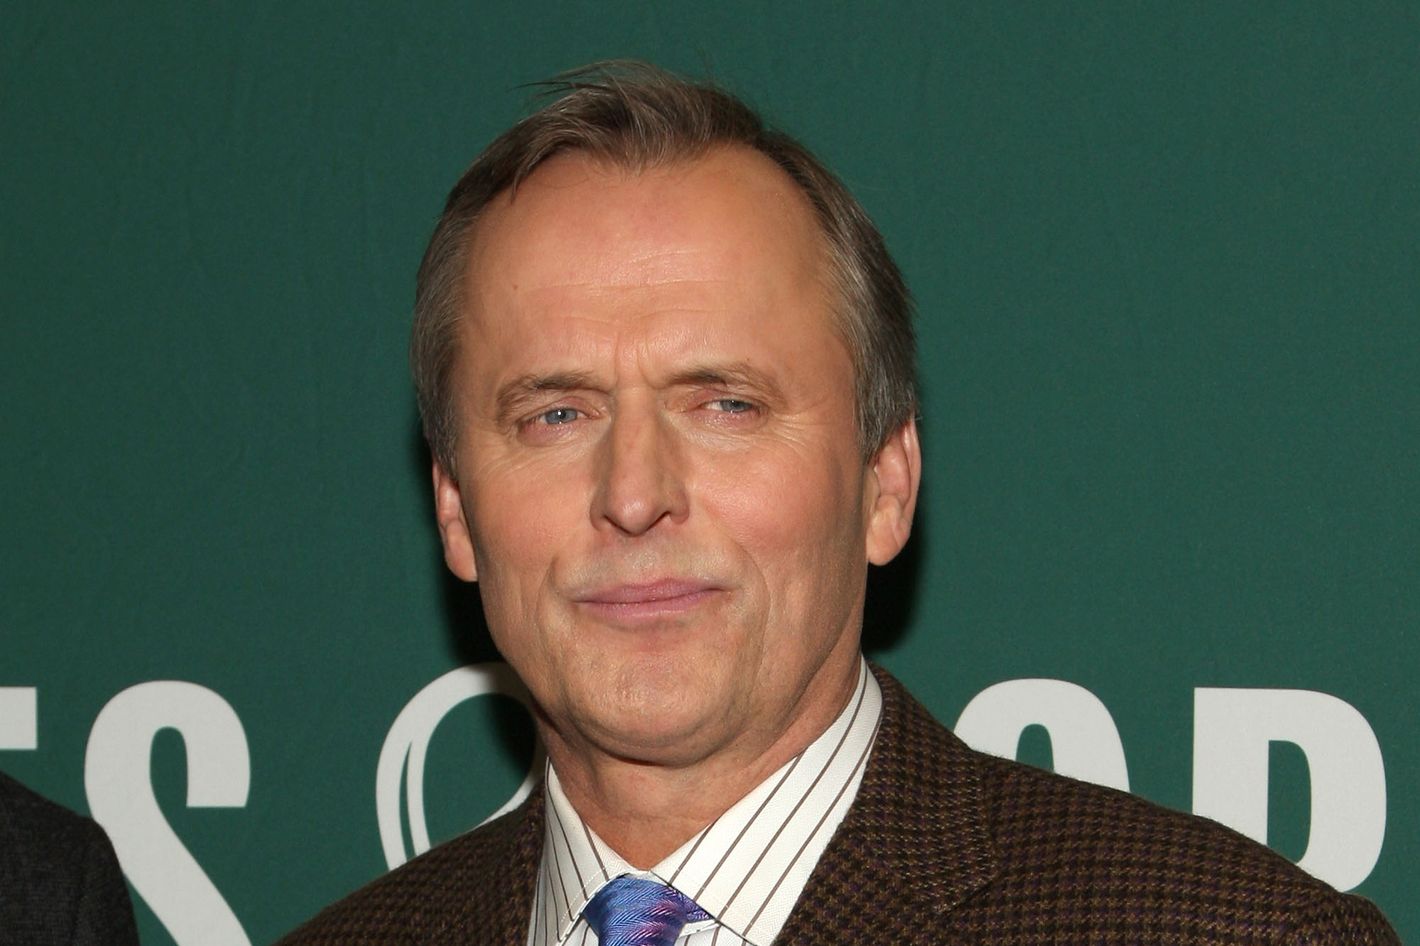 Xxx Vedeo 16yers Com - John Grisham Sticks Up for 60-Year-Old Guys Who Download Child Porn